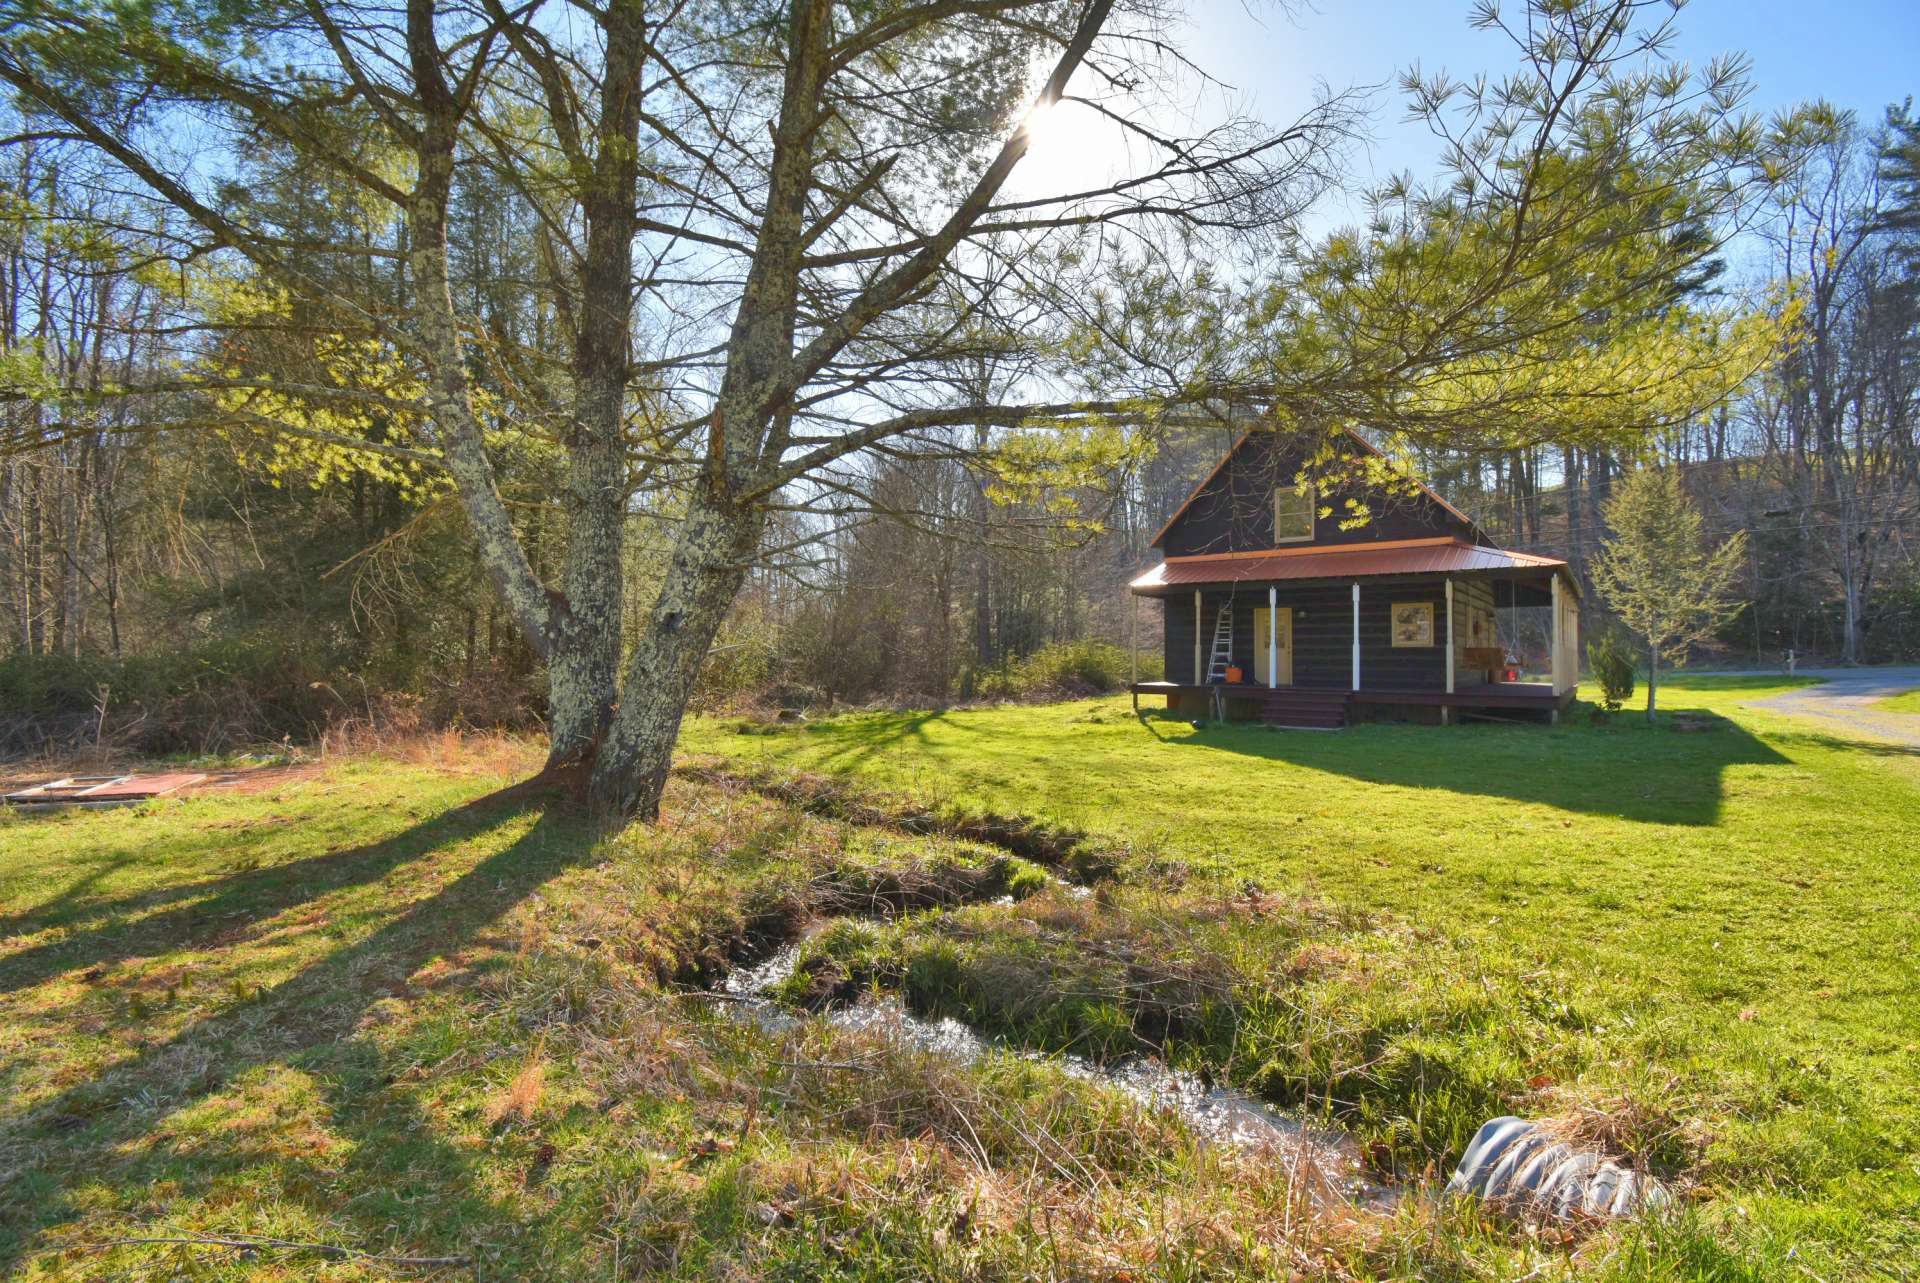 There is a small mountain stream meandering along side the cabin on its way to Whitetop Laurel Creek.